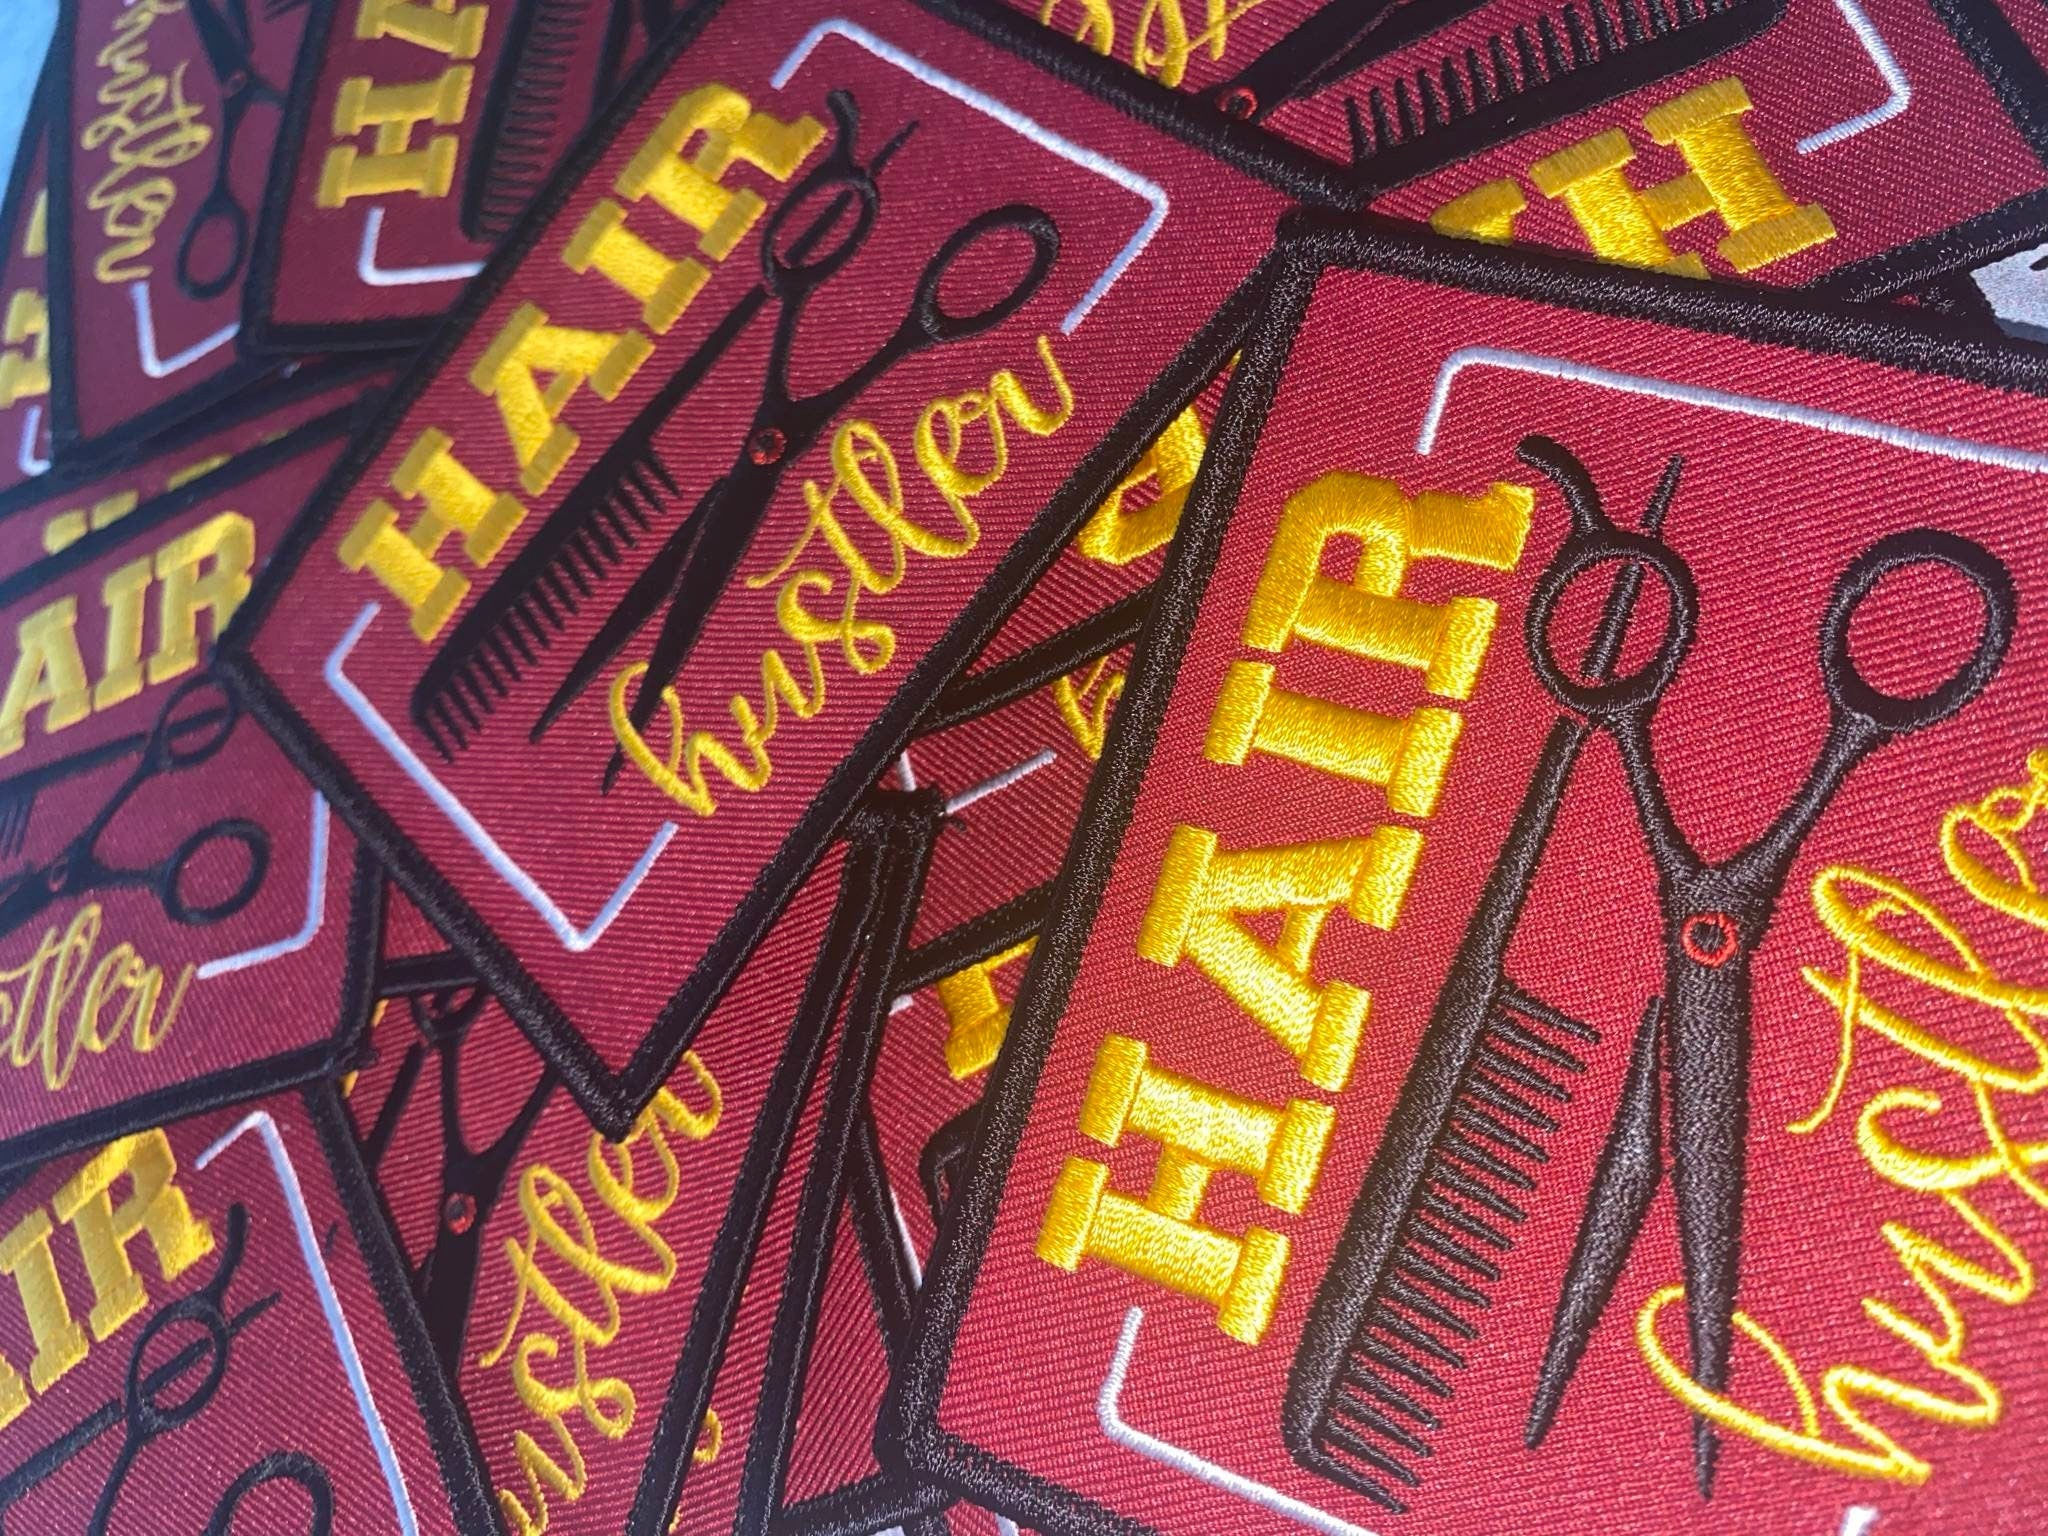 NEW, Maroon "Hair Hustler" Stylist Badge, 1-pc Iron-on Merit Badge, Embroidered, DIY, Great for Women & Men Stylists/Barbers, 4"